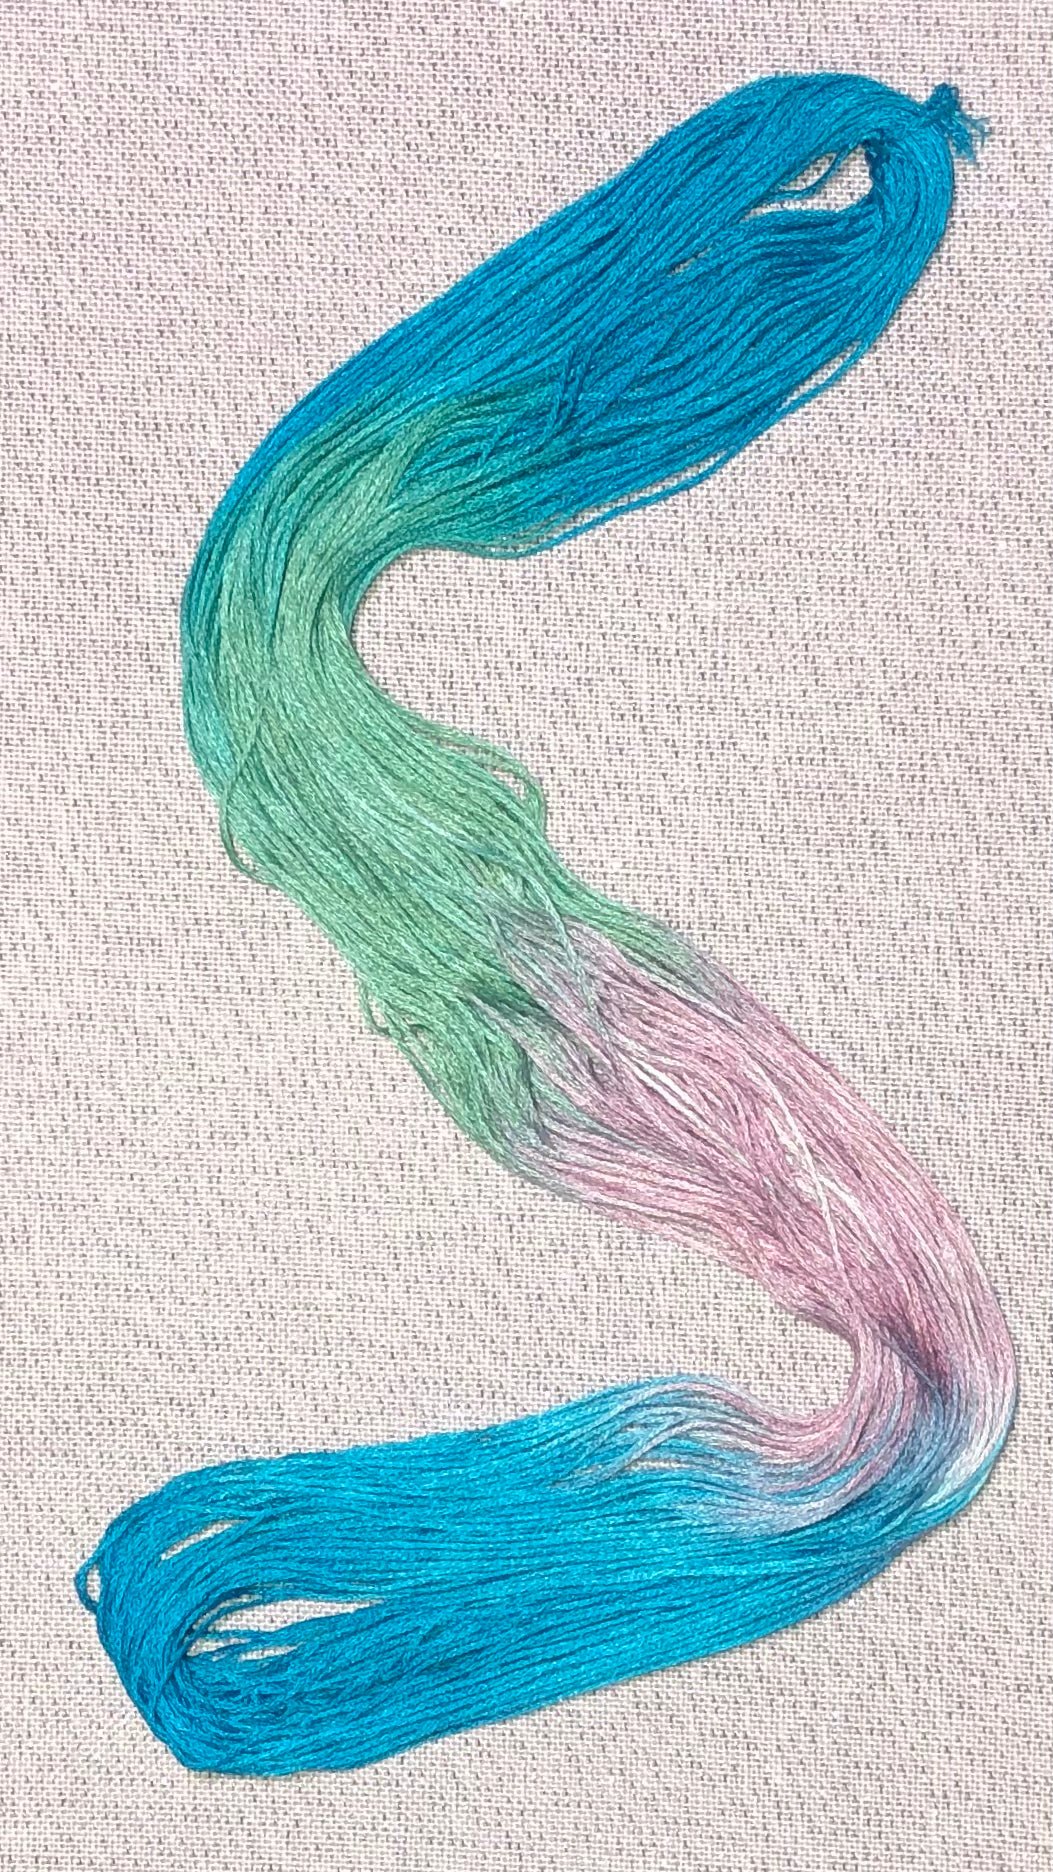 Silk hand dyed floss - Blue, Green, & Pink - Dyeing for Cross Stitch